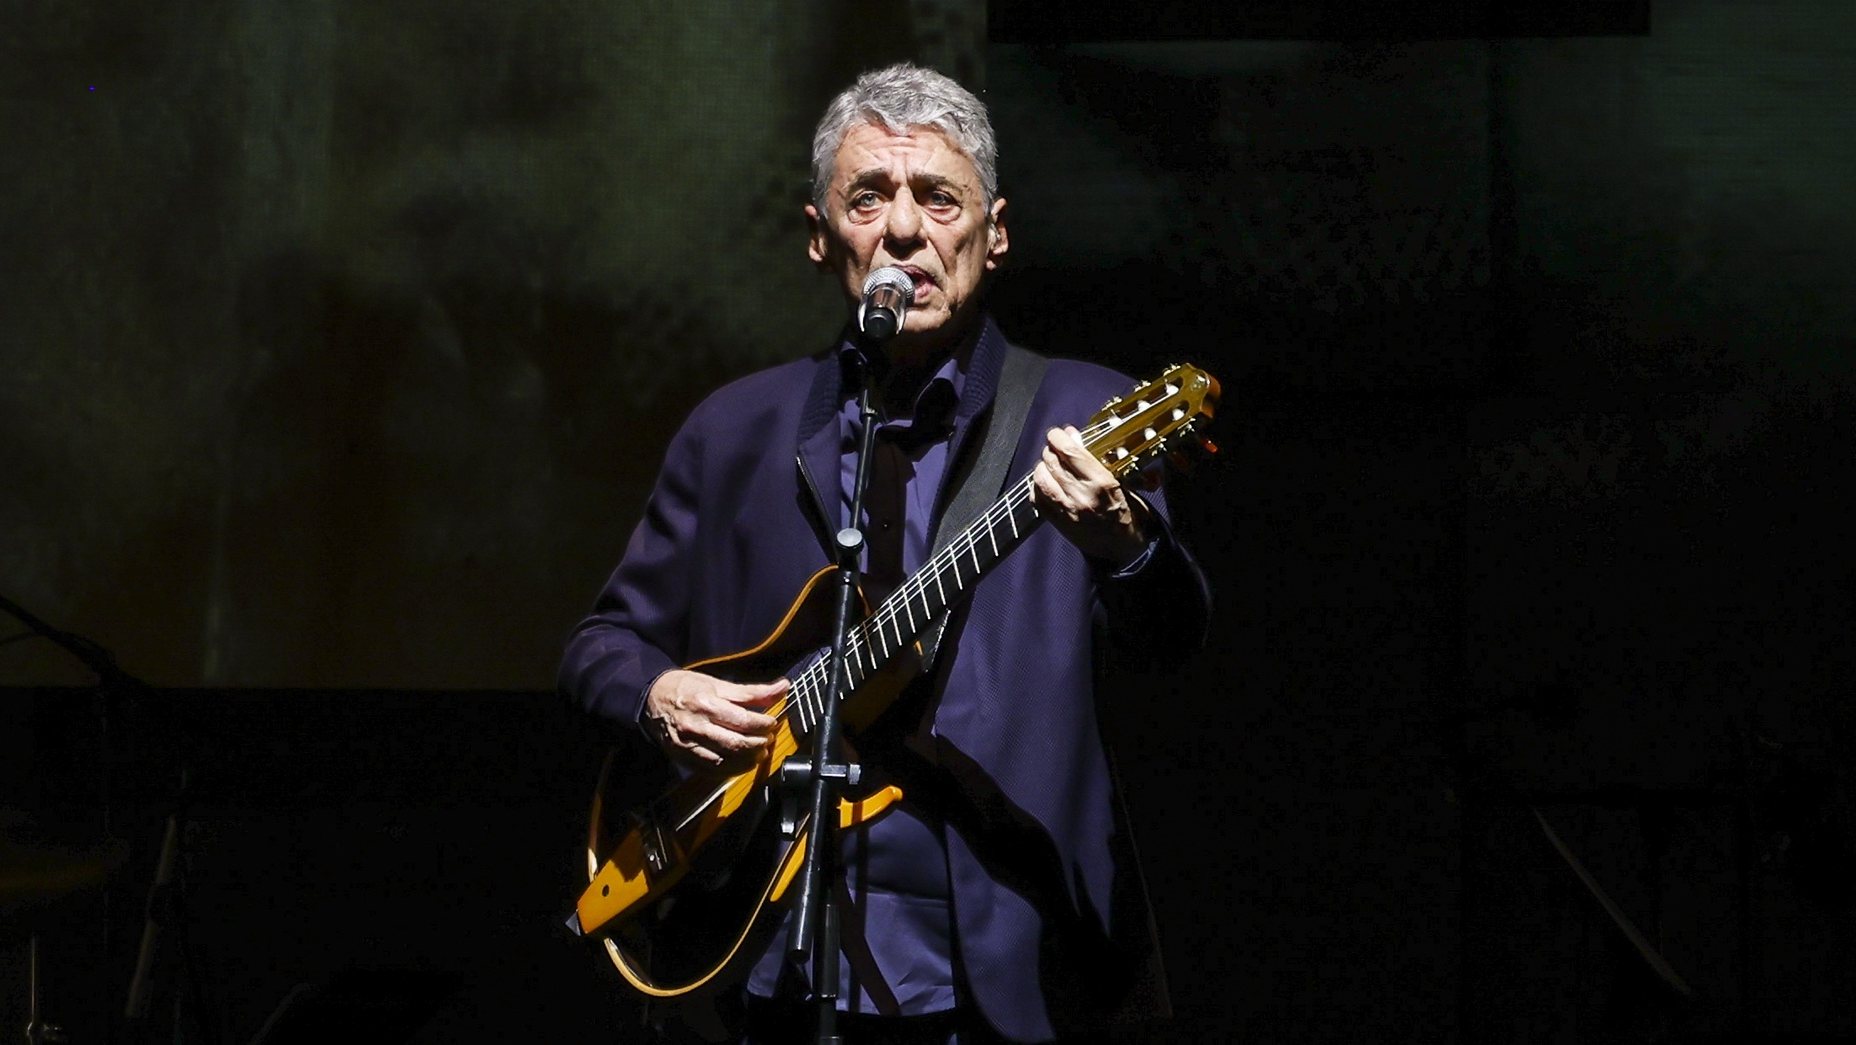 Brazilian singer-songwriter, guitarist, composer, playwright, writer, and poet Chico Buarque, performs live in concert at Campo Pequeno, Lisbon, Portugal, 02 June 2023. JOSE SENA GOULAO/LUSA